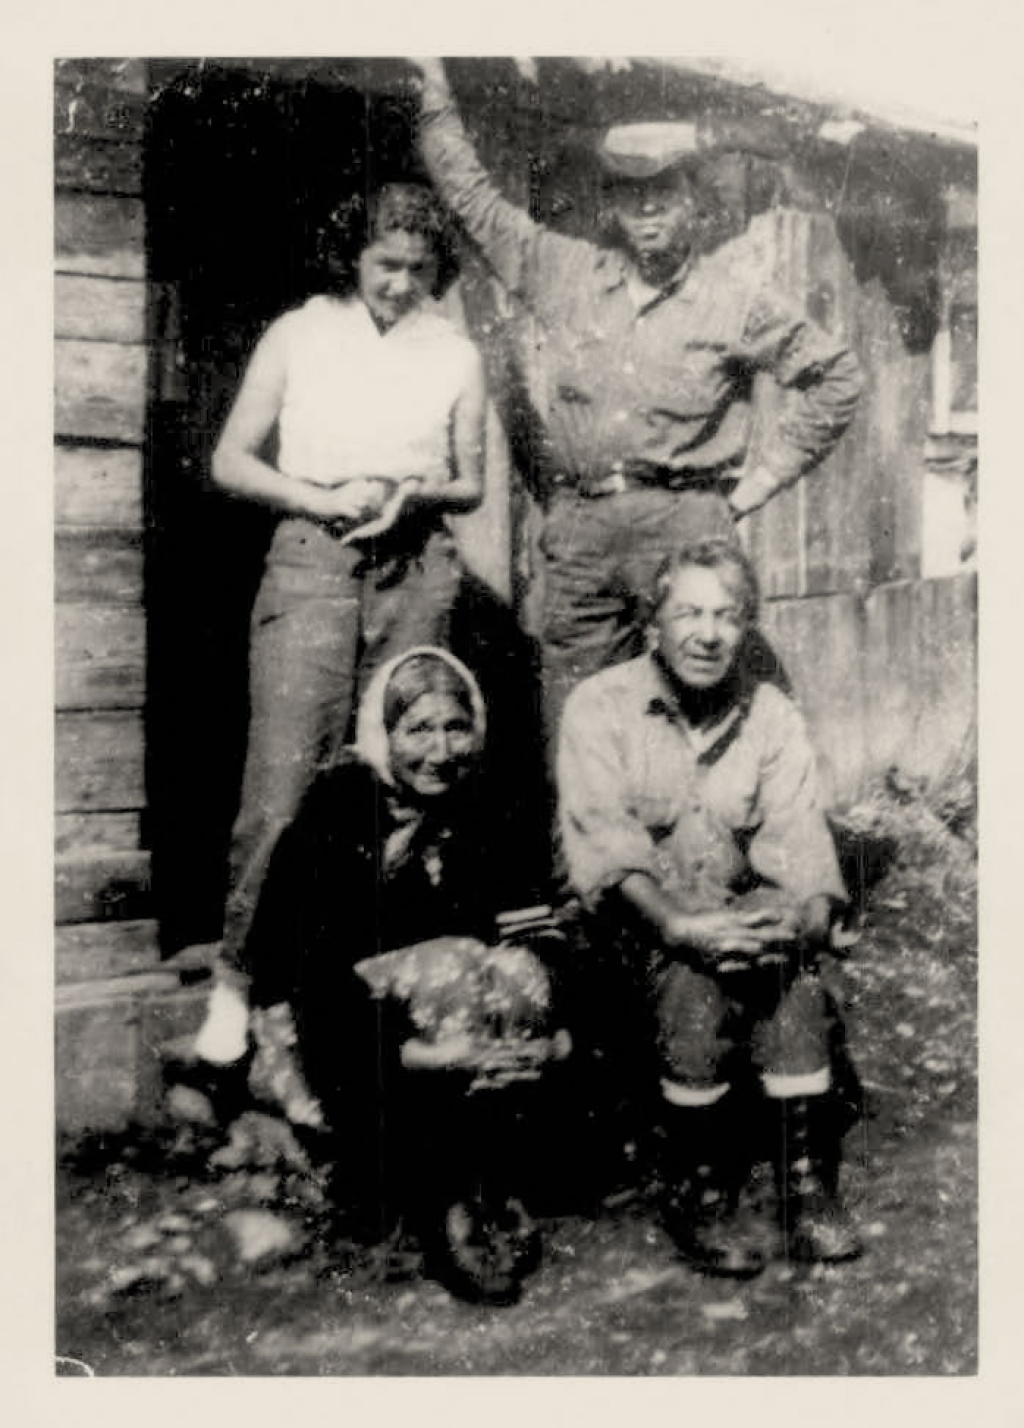 A picture of some of Norval Morrisseau's family members, including his grandfather and brother